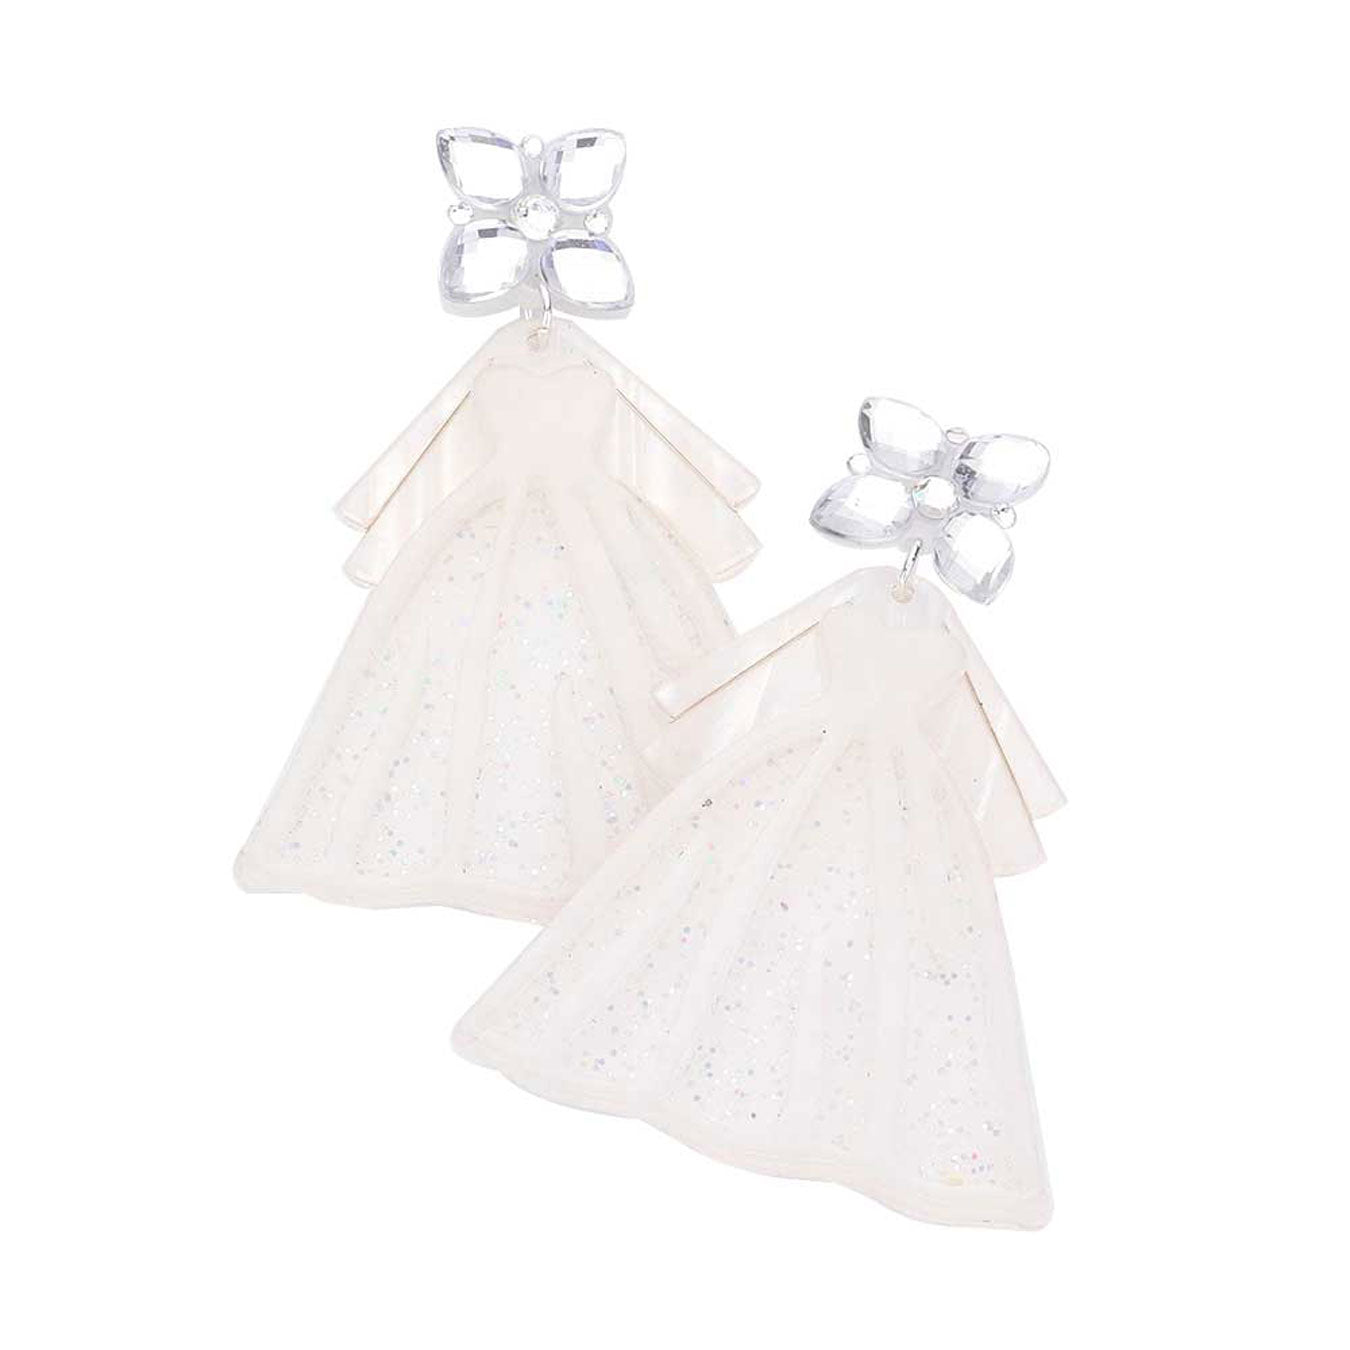 White Glittered Wedding Dress Dangle Earrings, make a lovely gift for a mother, sister or friend. Add a bit of sophisticated glamour to your look with these pretty Wedding Dress earrings. would be a lovely gift got prom, sweet 16, 'something new' for your wedding day or a thank you gift for bridesmaids, Birthday, Anniversary or any special occasion. 